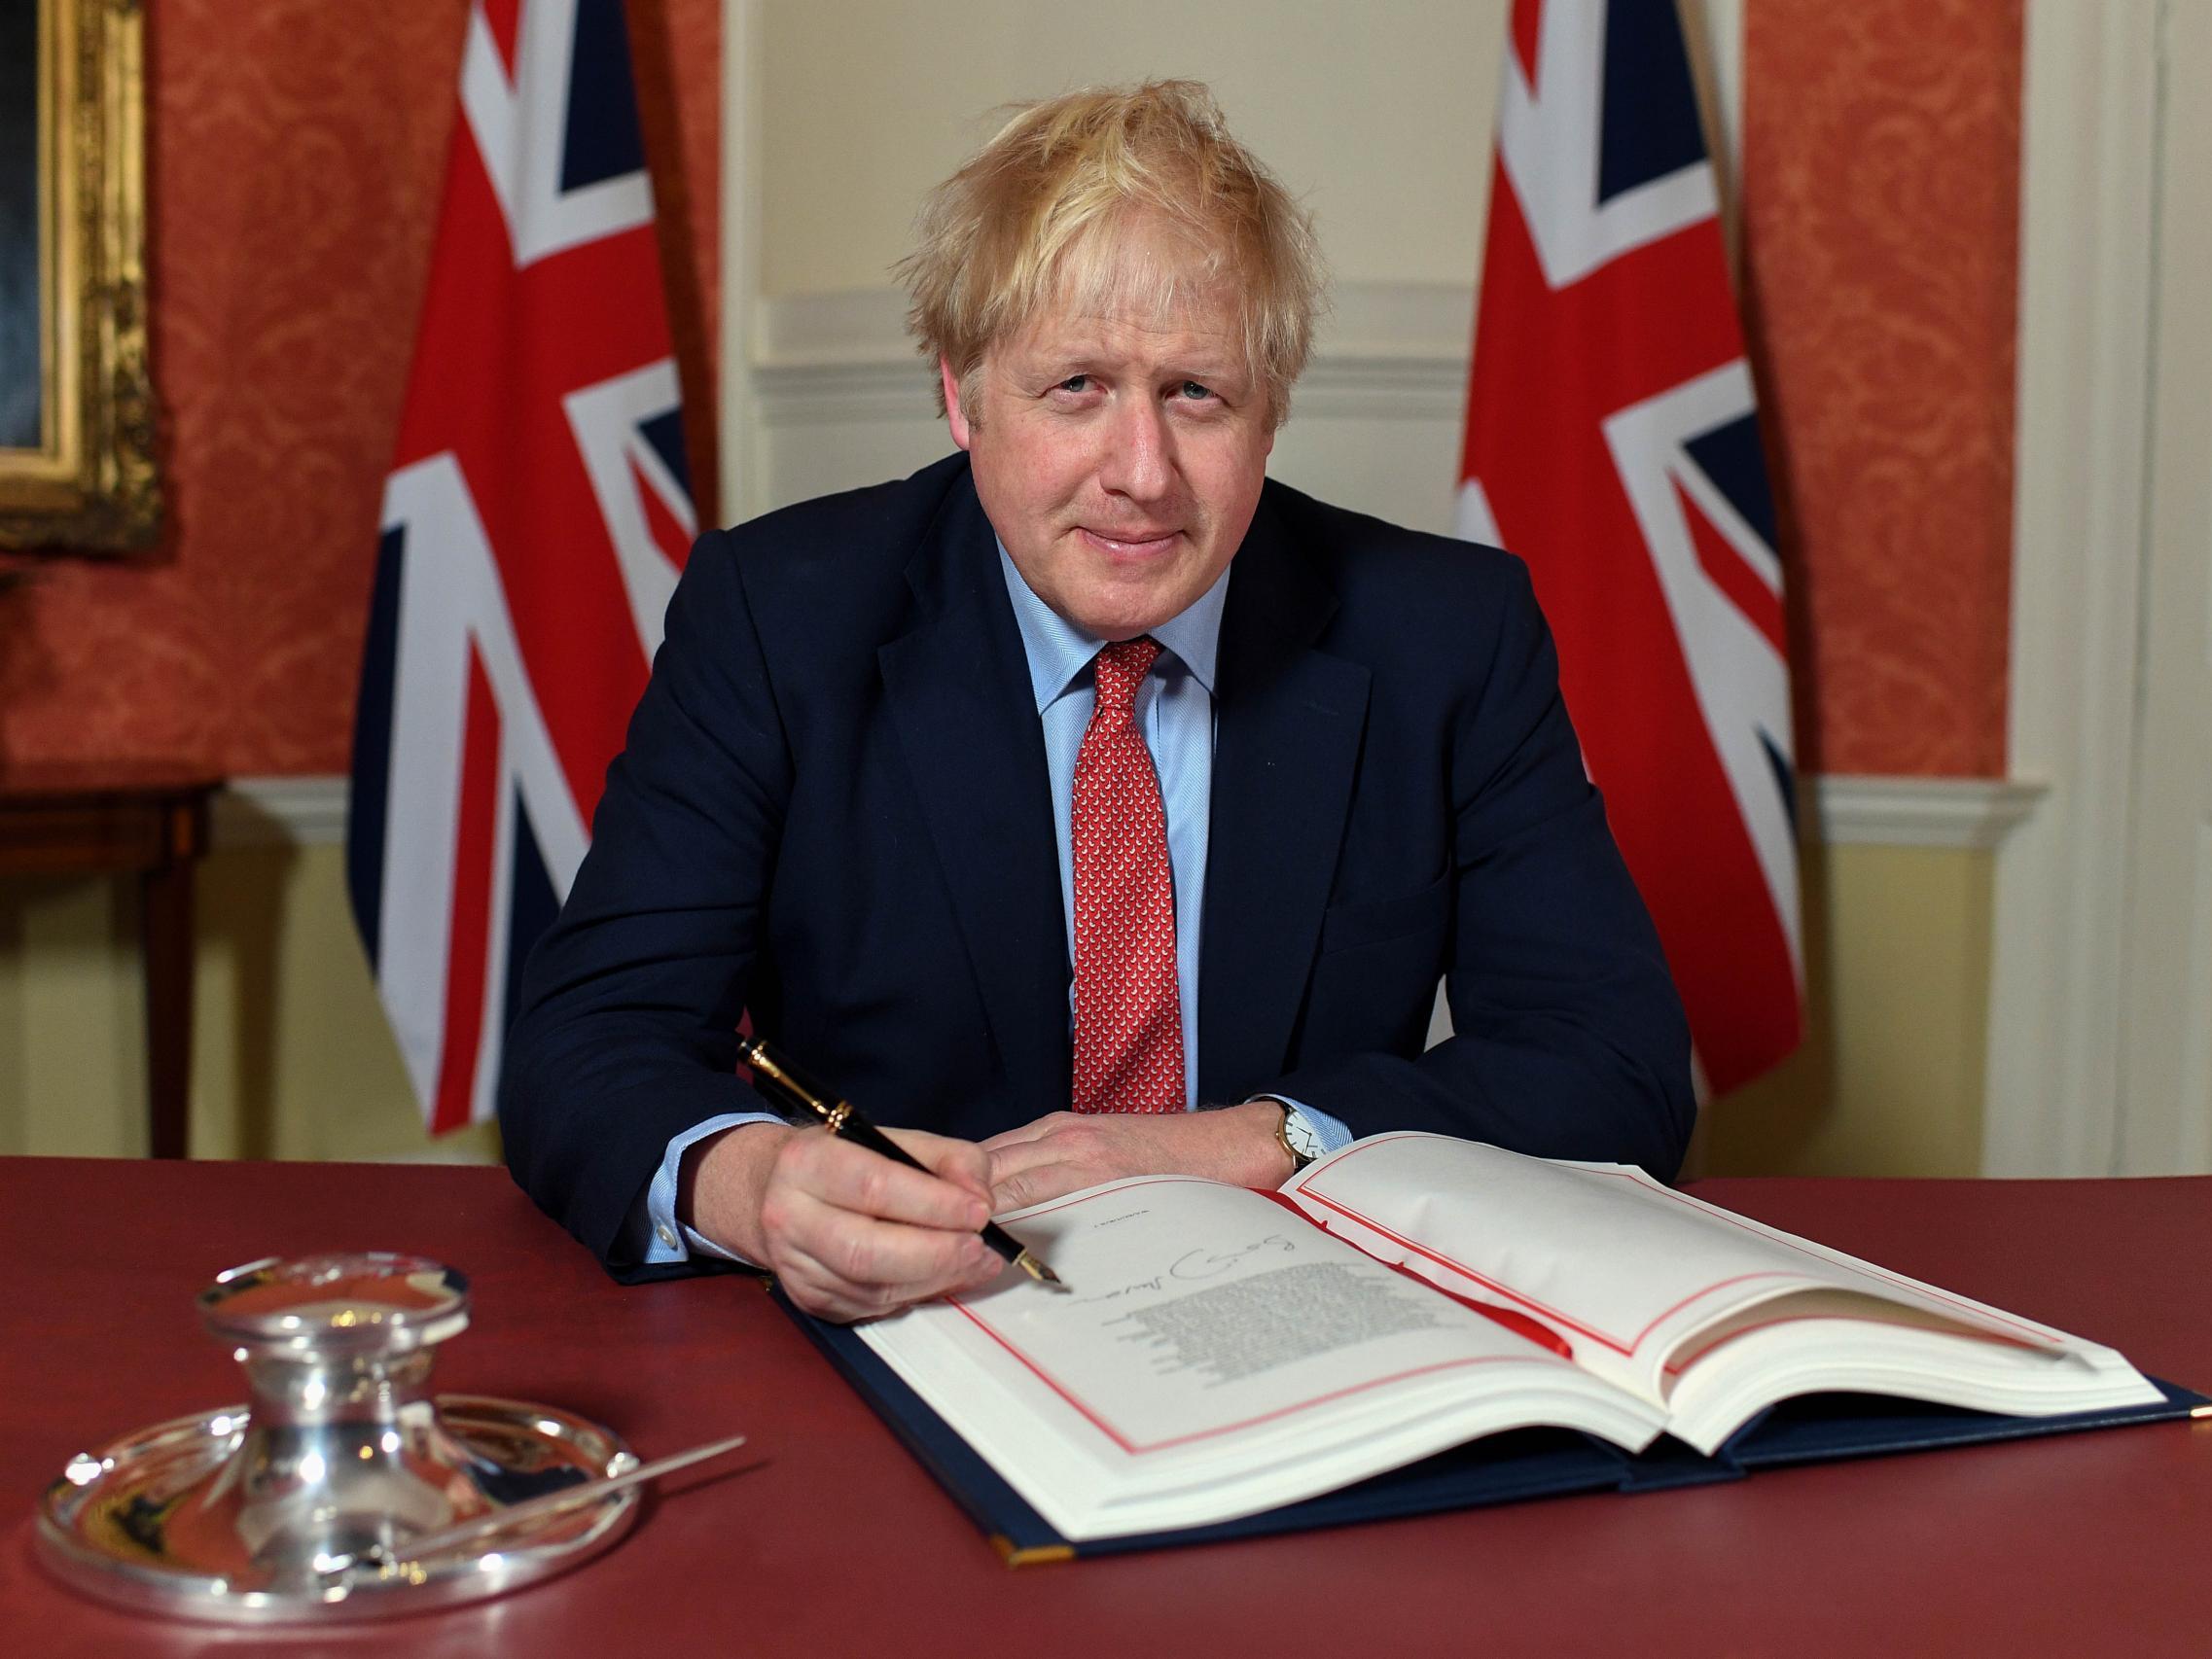 Boris Johnson signing the withdrawal agreement which will take the UK out of the EU